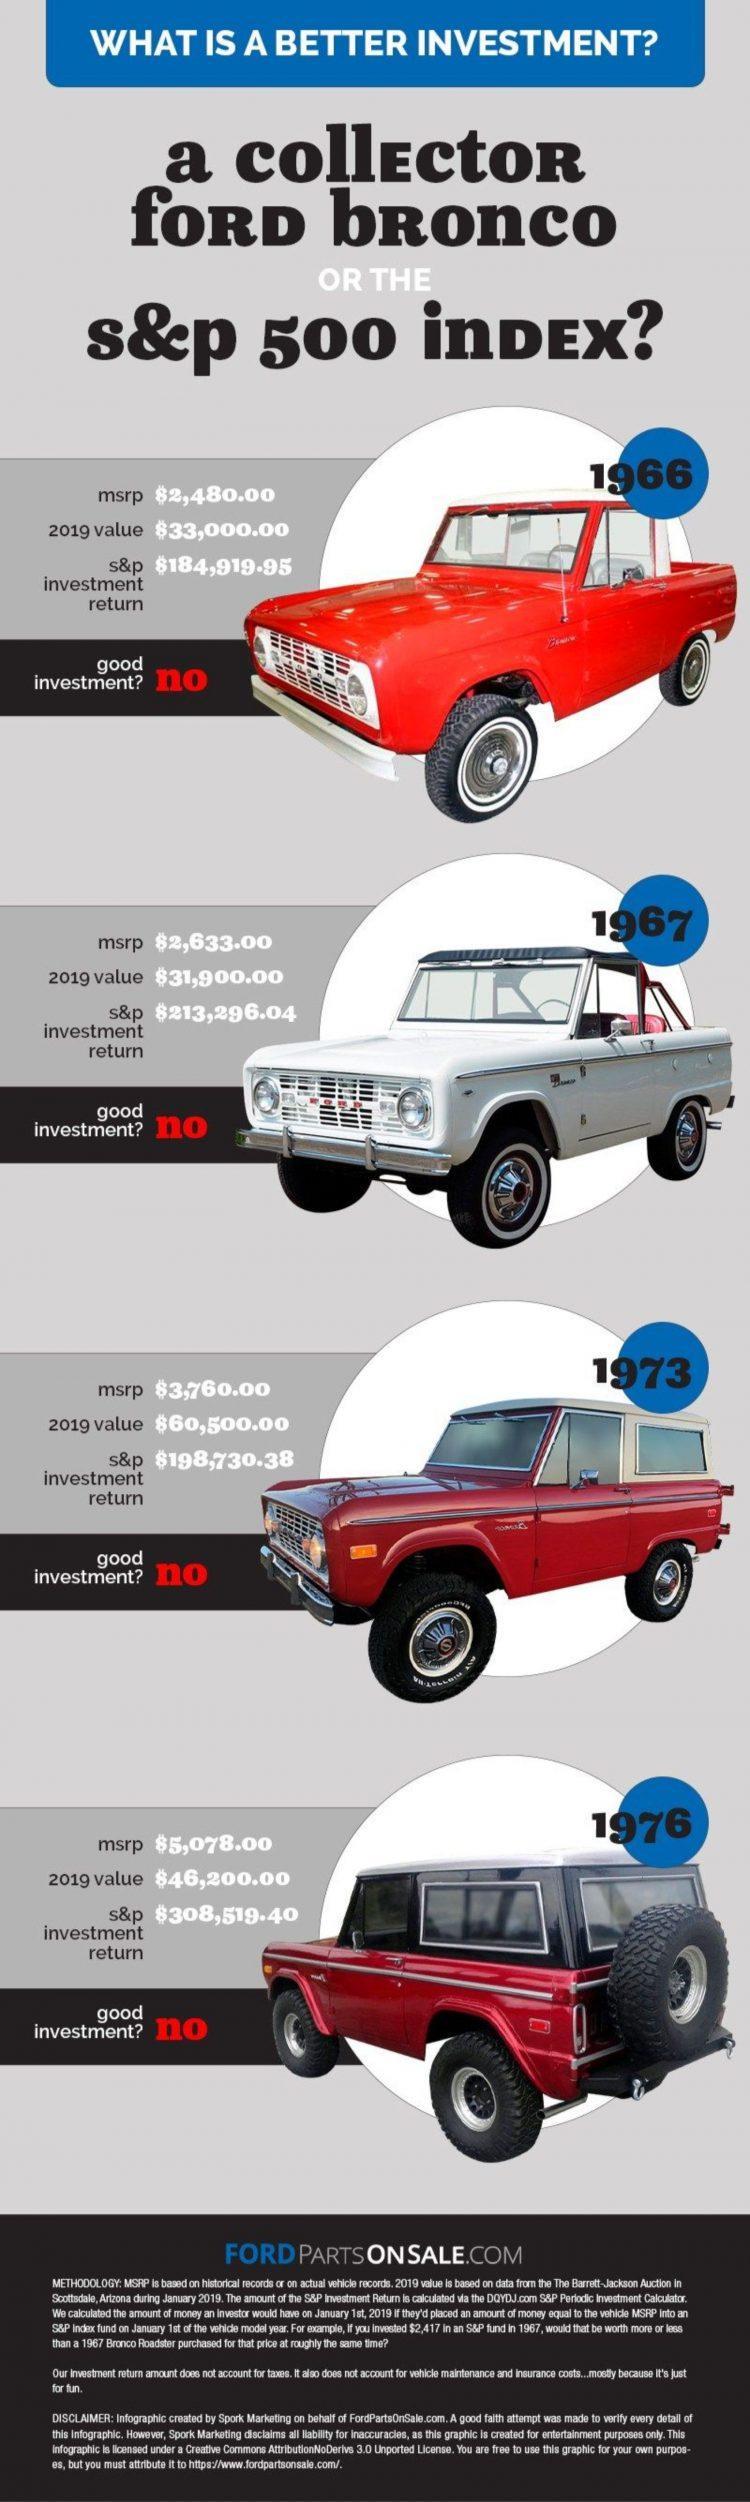 Classic Ford Bronco Versus S: Can it compete?